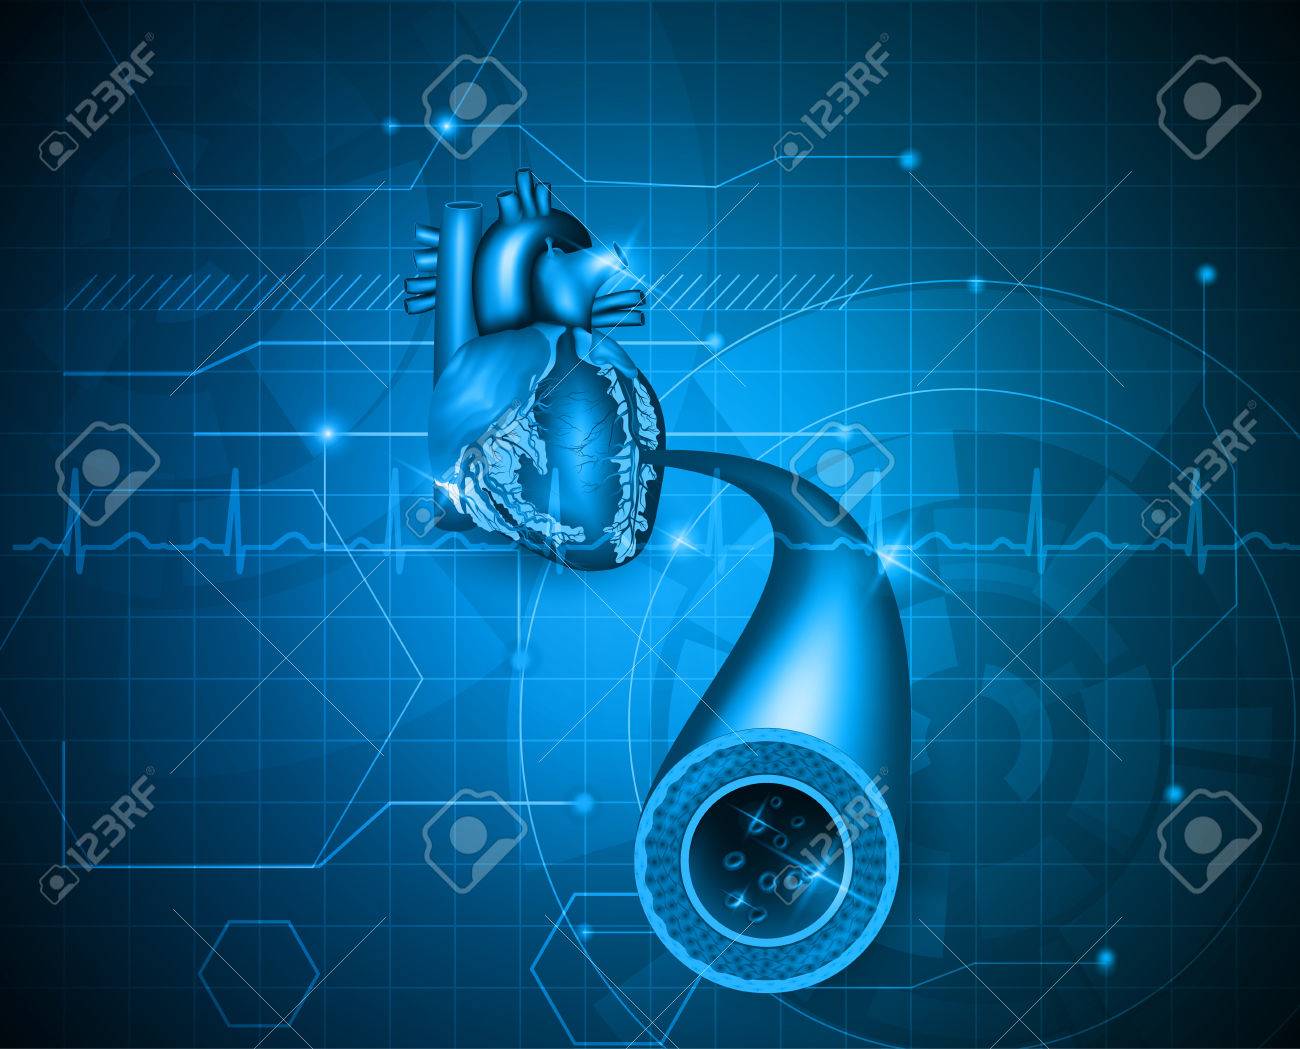 Cardiology Abstract Blue Background Human Heart Artery And Normal